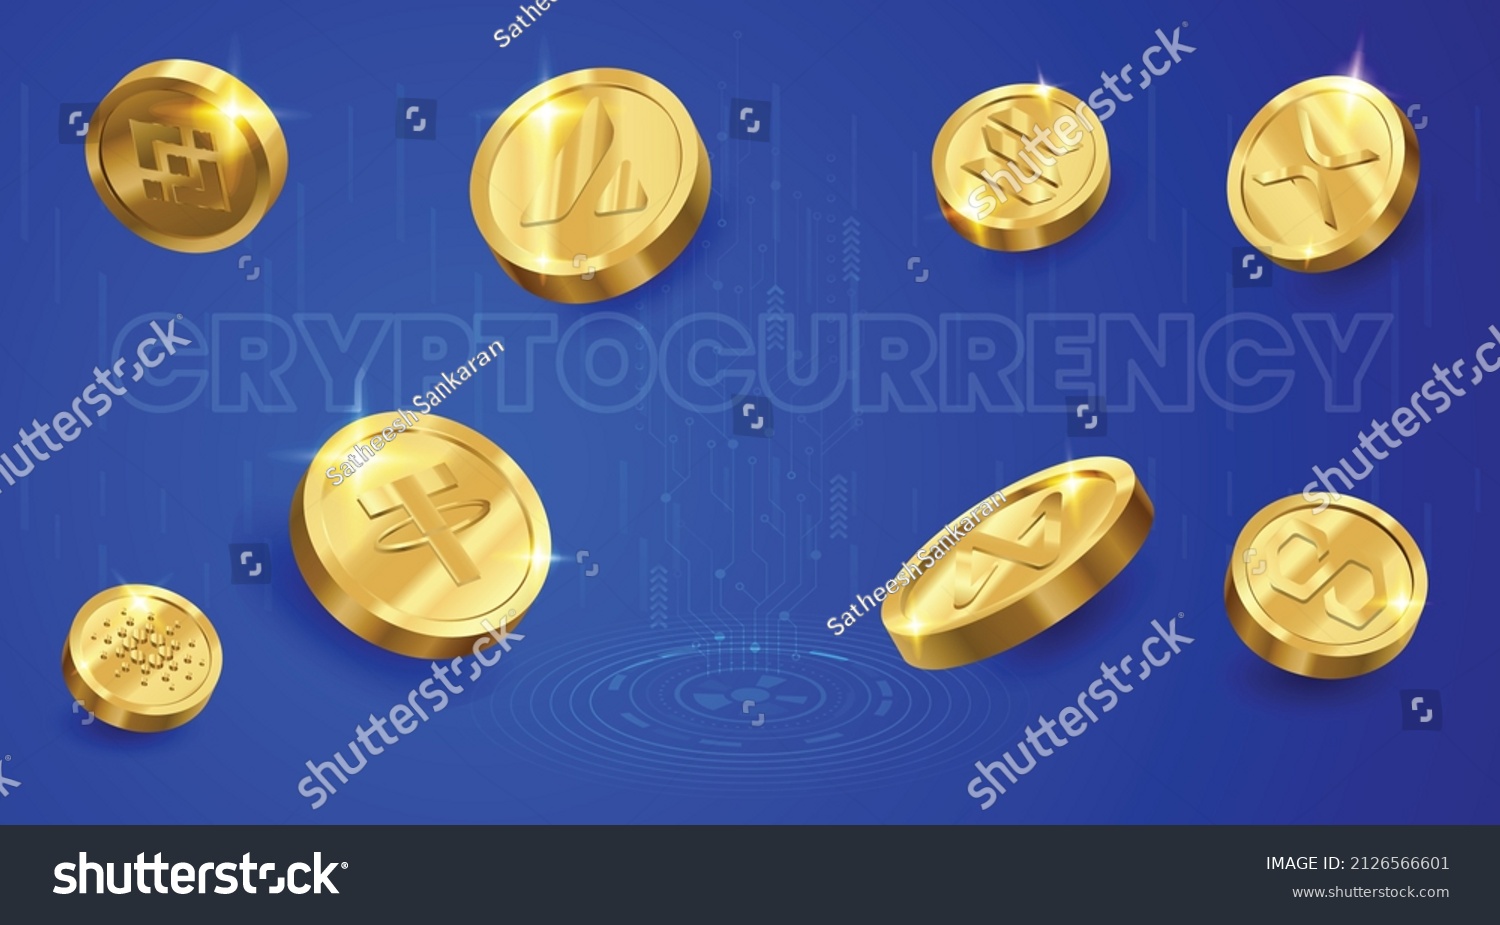 SVG of Cryptocurrency digital payment technology based on blockchain vector background with Tether USDT, Solana SOL, XRP, Avalanche AVAX, Binance Coin BNB, Cardano ADA, Near Protocol and Polygon MATIC logos  svg